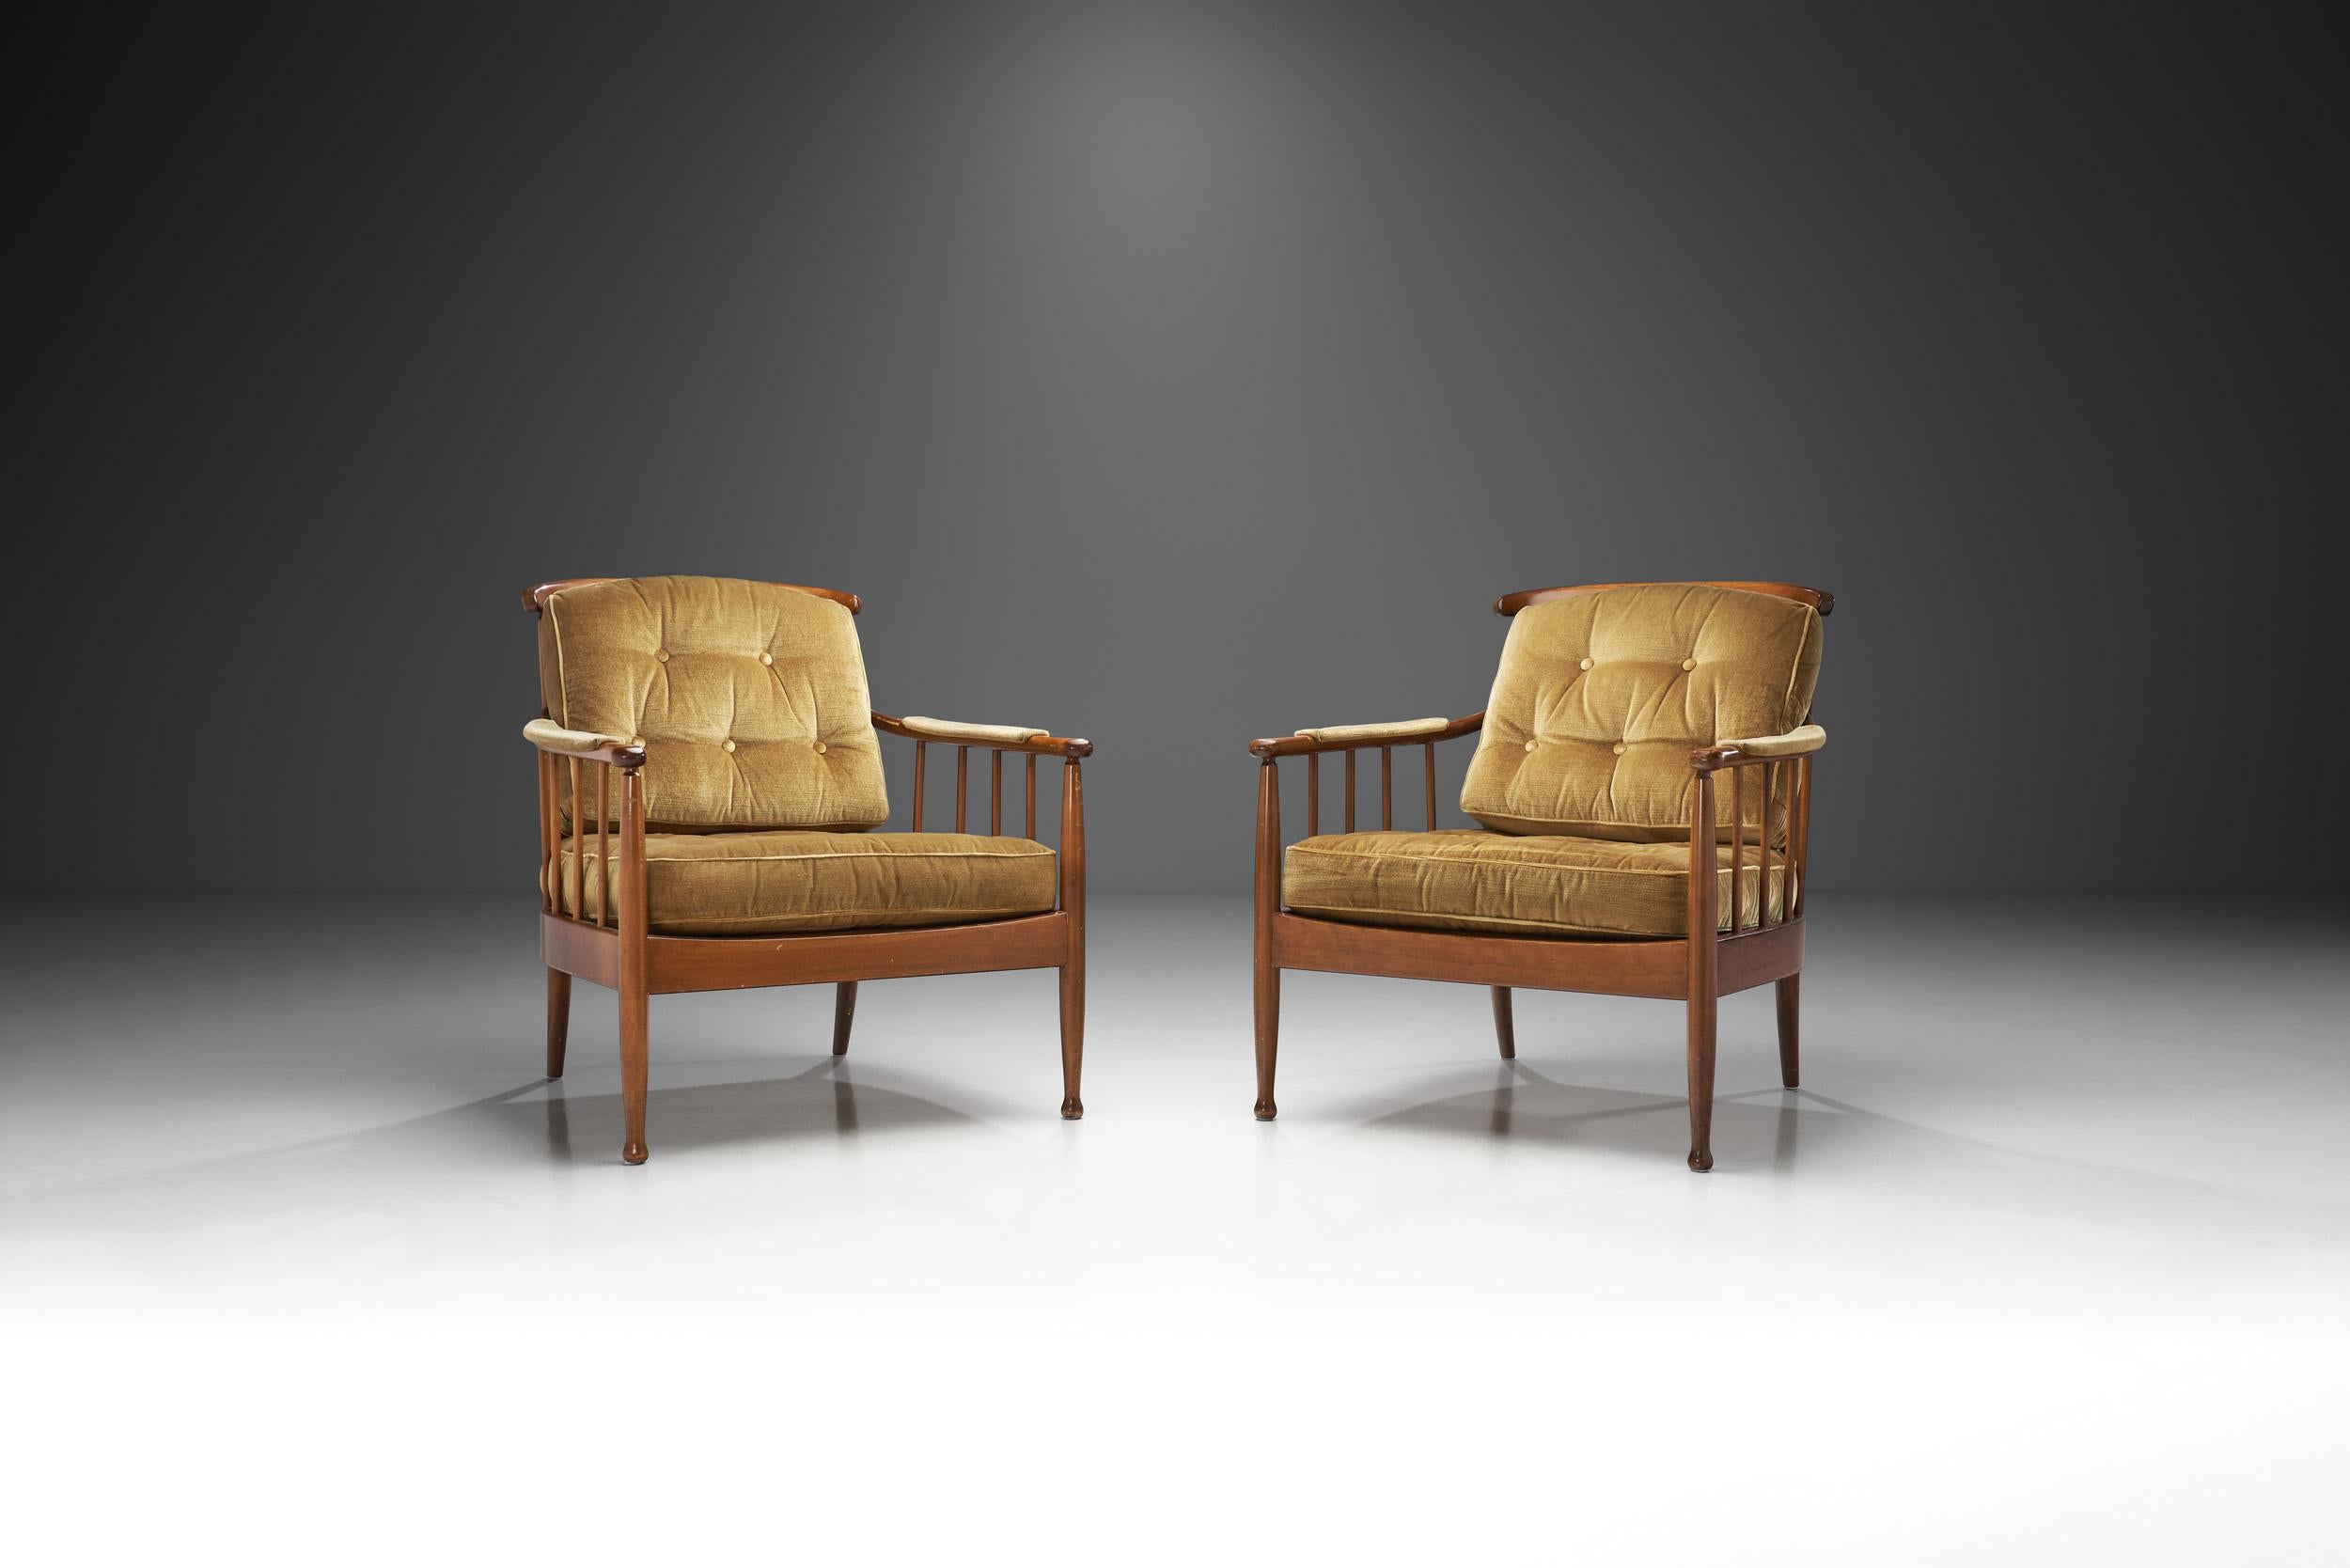 The “Skrindan” armchair model was designed in 1963 by iconic Swedish designer, Kerstin Hörlin-Homquist. Kerstin Hörlin-Holmquist had a unique and humanistic design vision, and thanks to her uncompromising attitude, she created some of the most